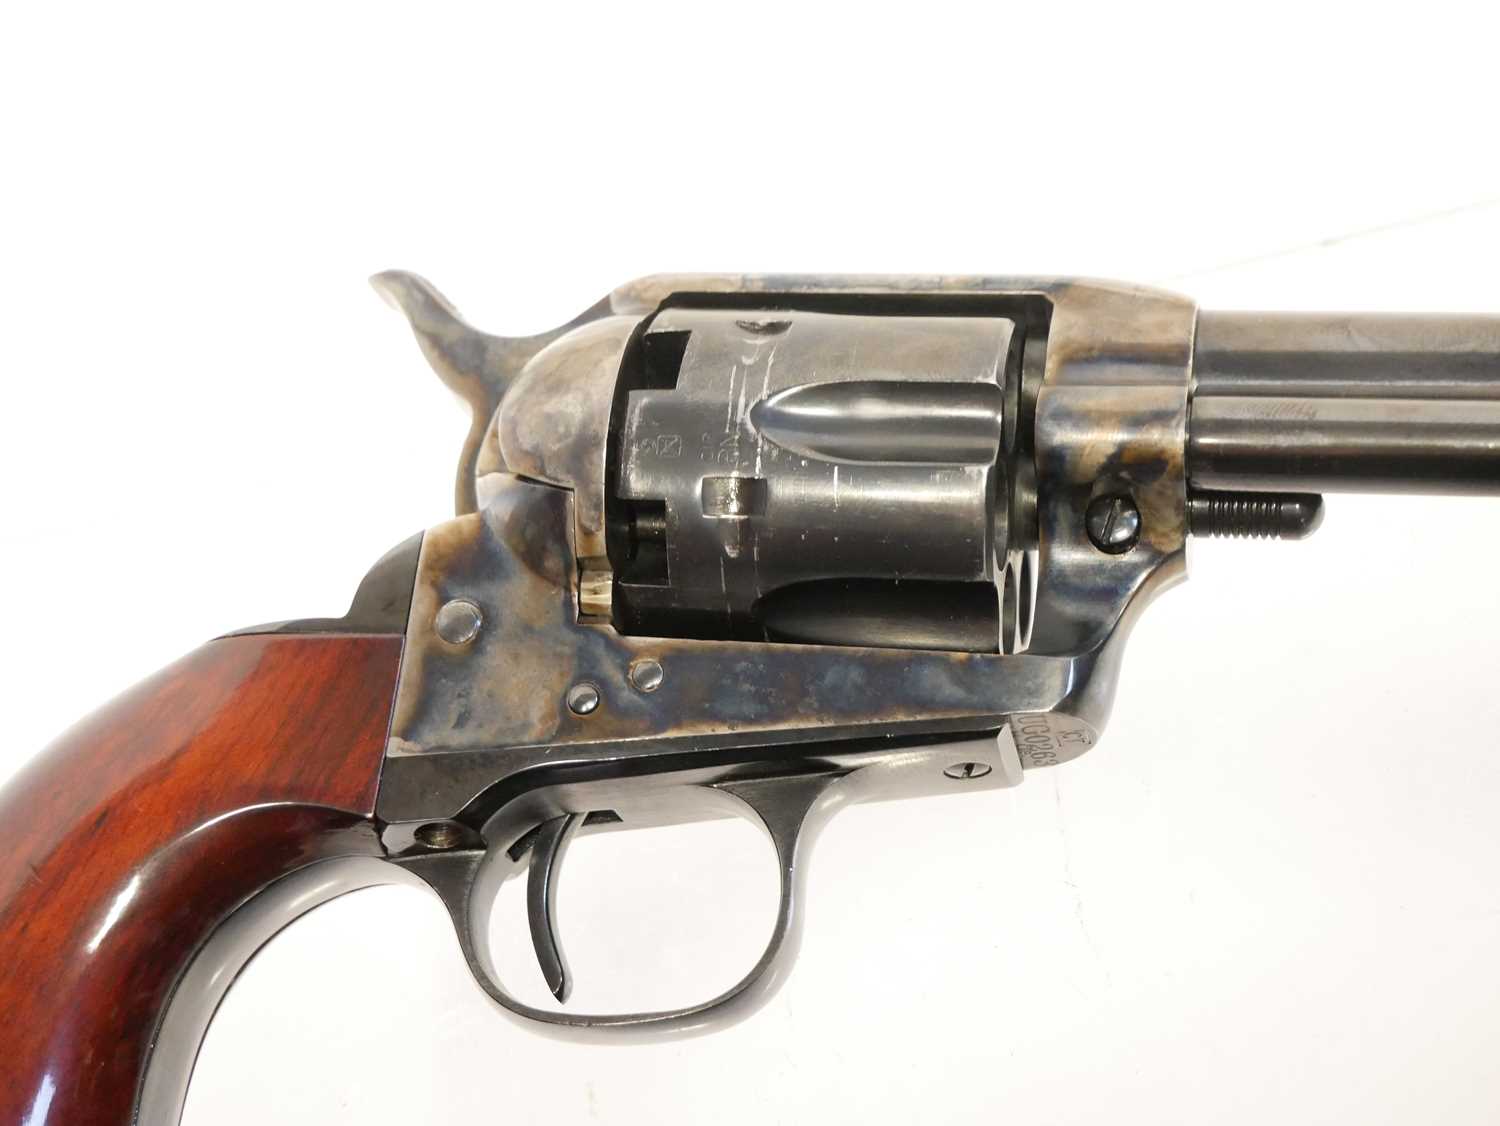 Uberti .44 percussion muzzle loading cattleman revolver, serial number UG0263, 7.5inch barrel, - Image 3 of 10